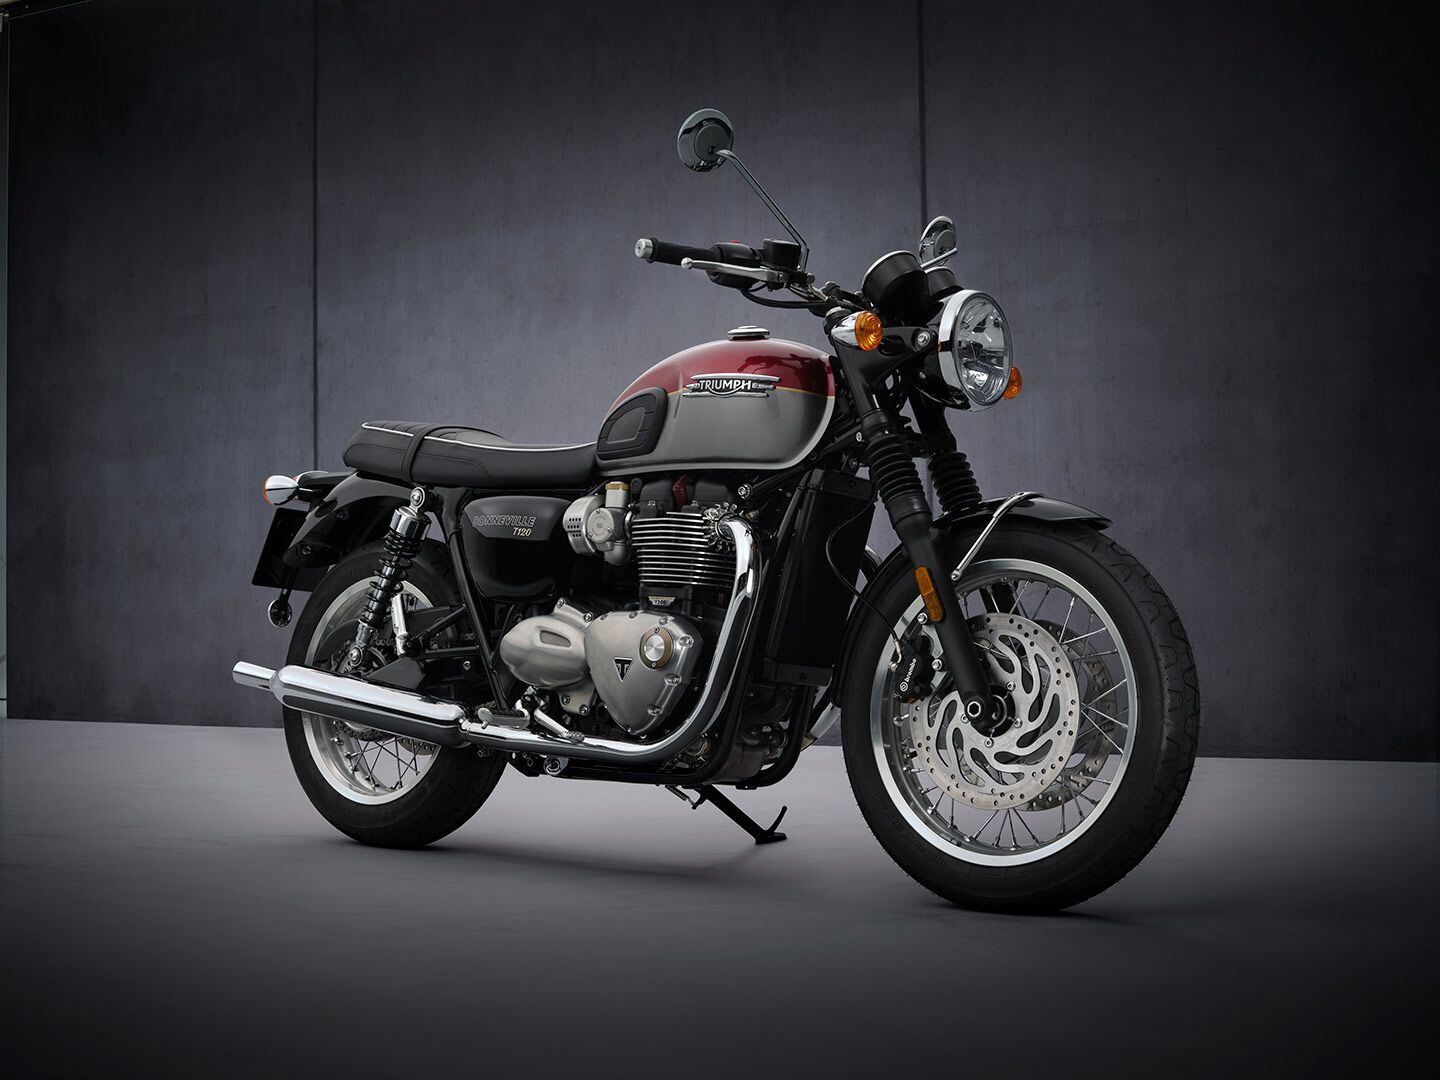 Born the same year as Barbie, the Triumph Bonneville is an excellent choice for a leisurely ride for two.